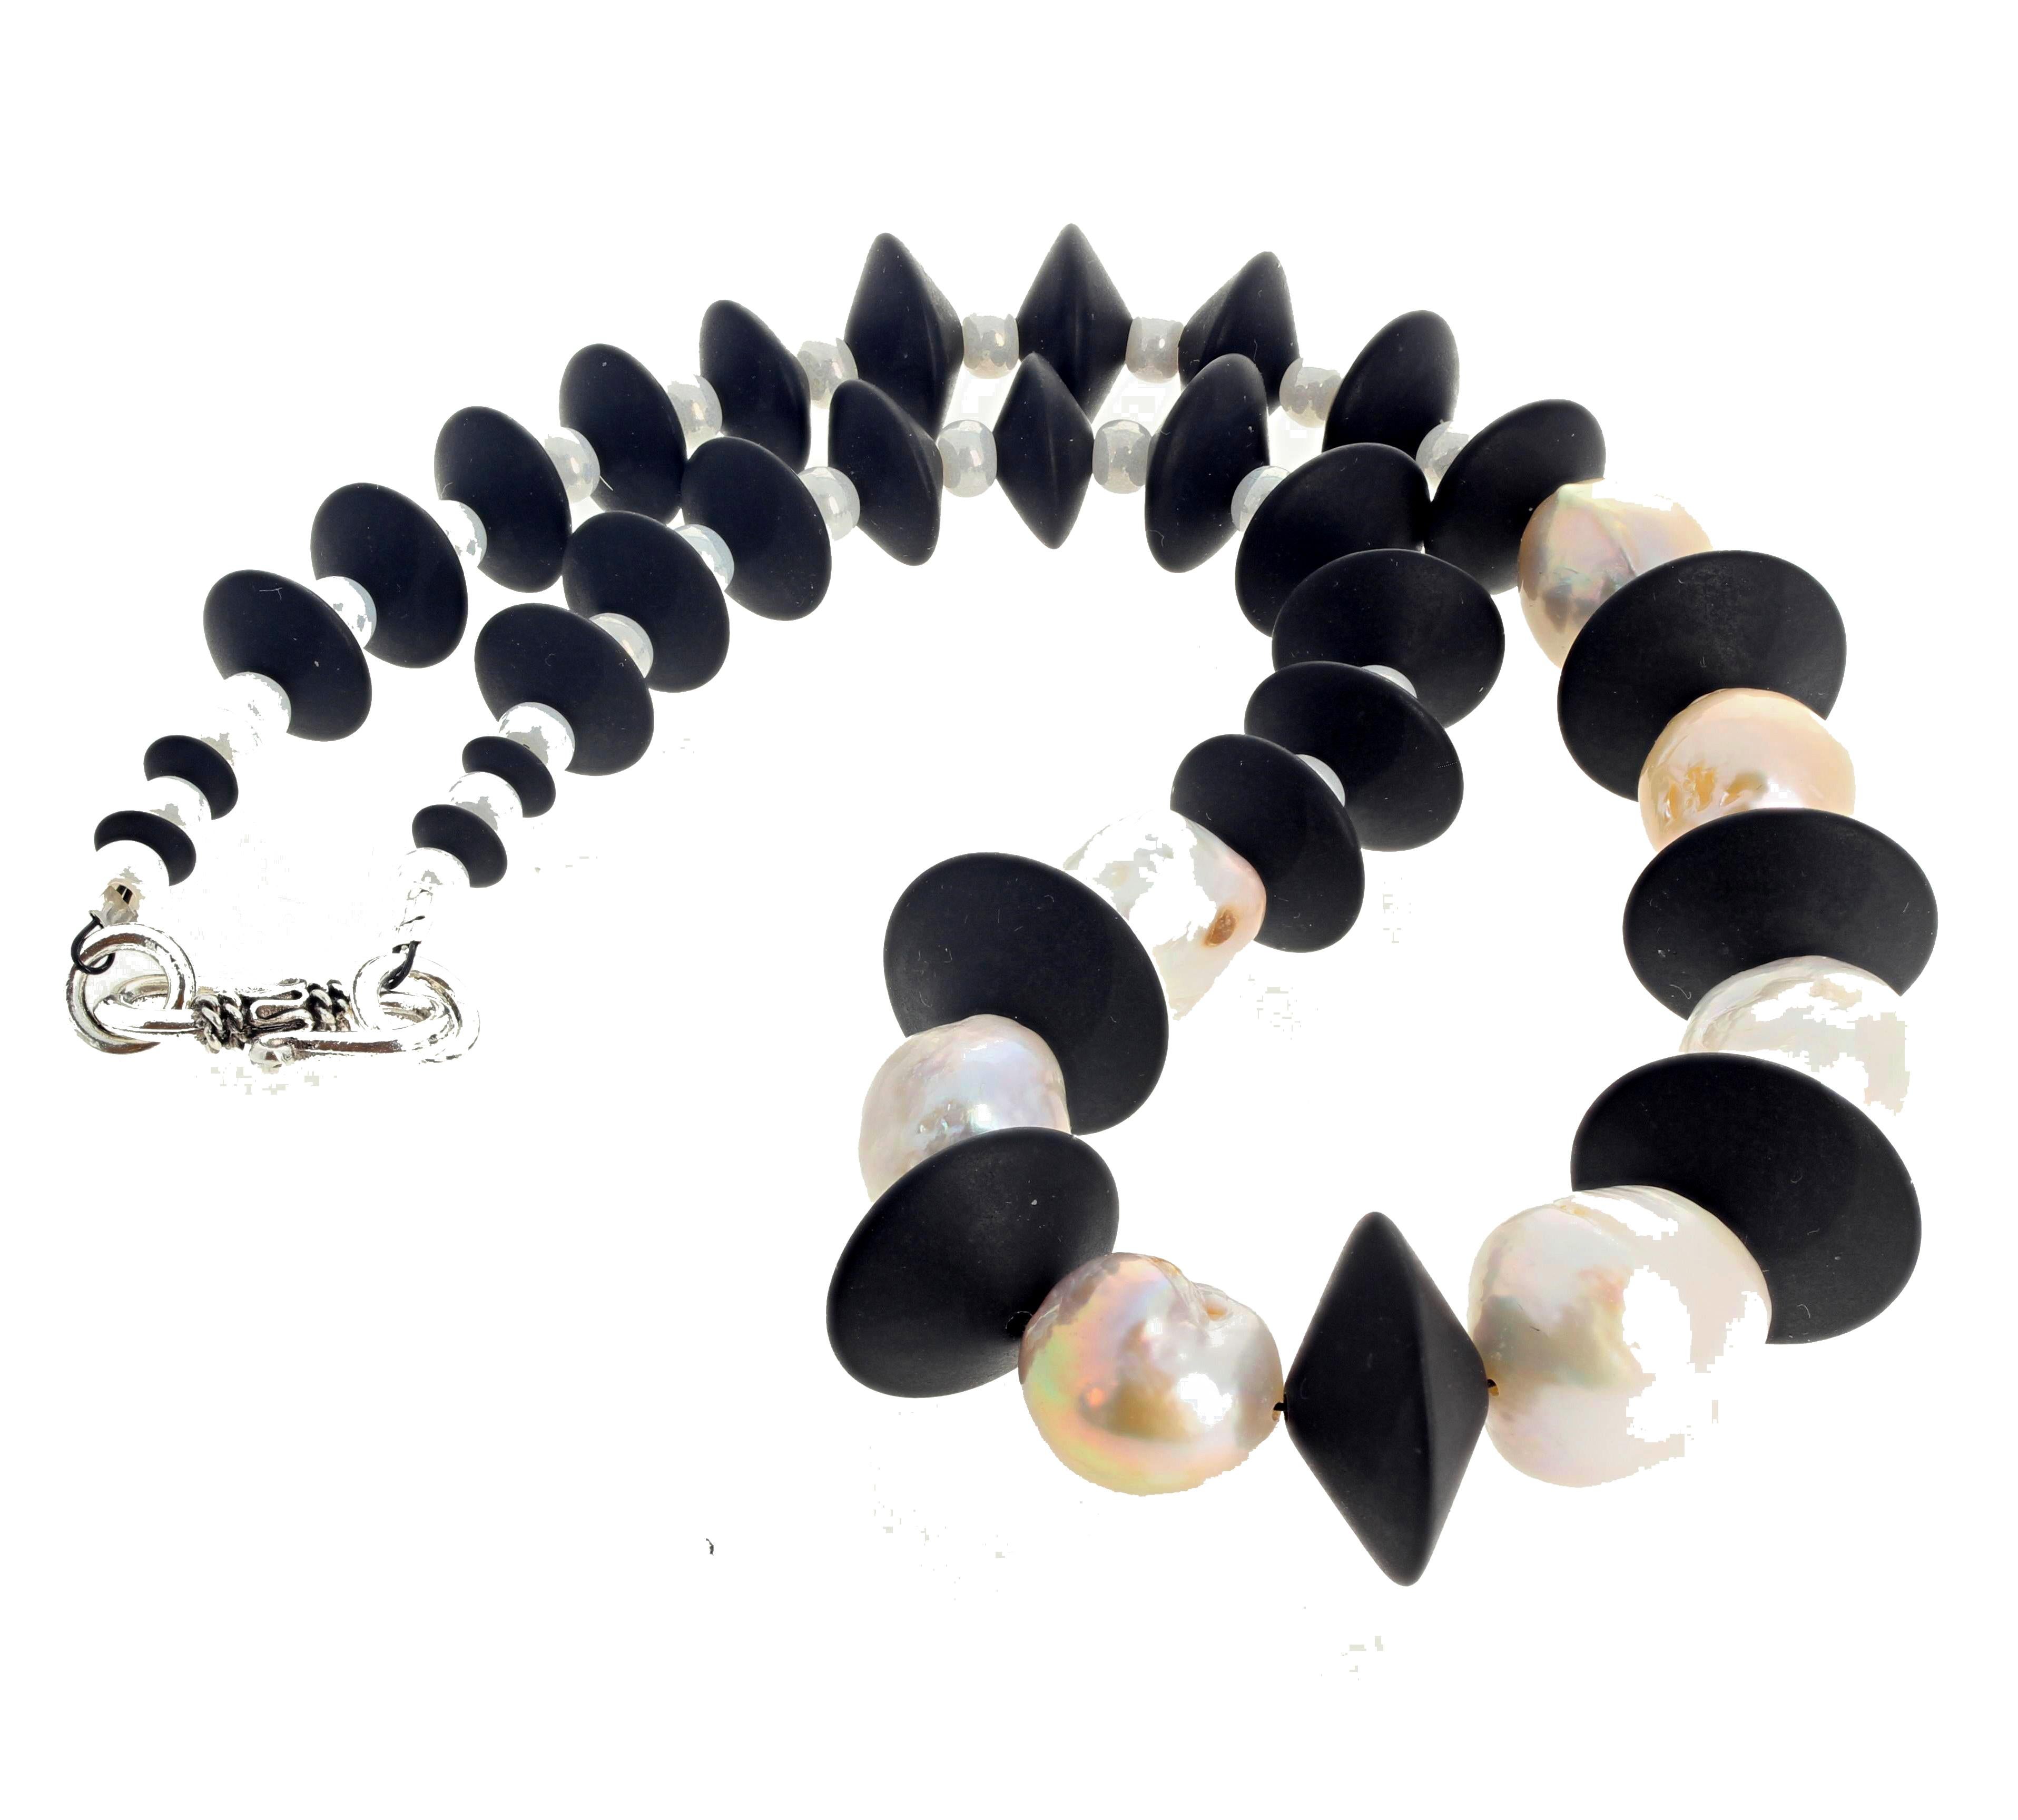 Mixed Cut AJD Stunningly Beautiful Elegant Natural Cultured Real Pearls & Black Onyx For Sale